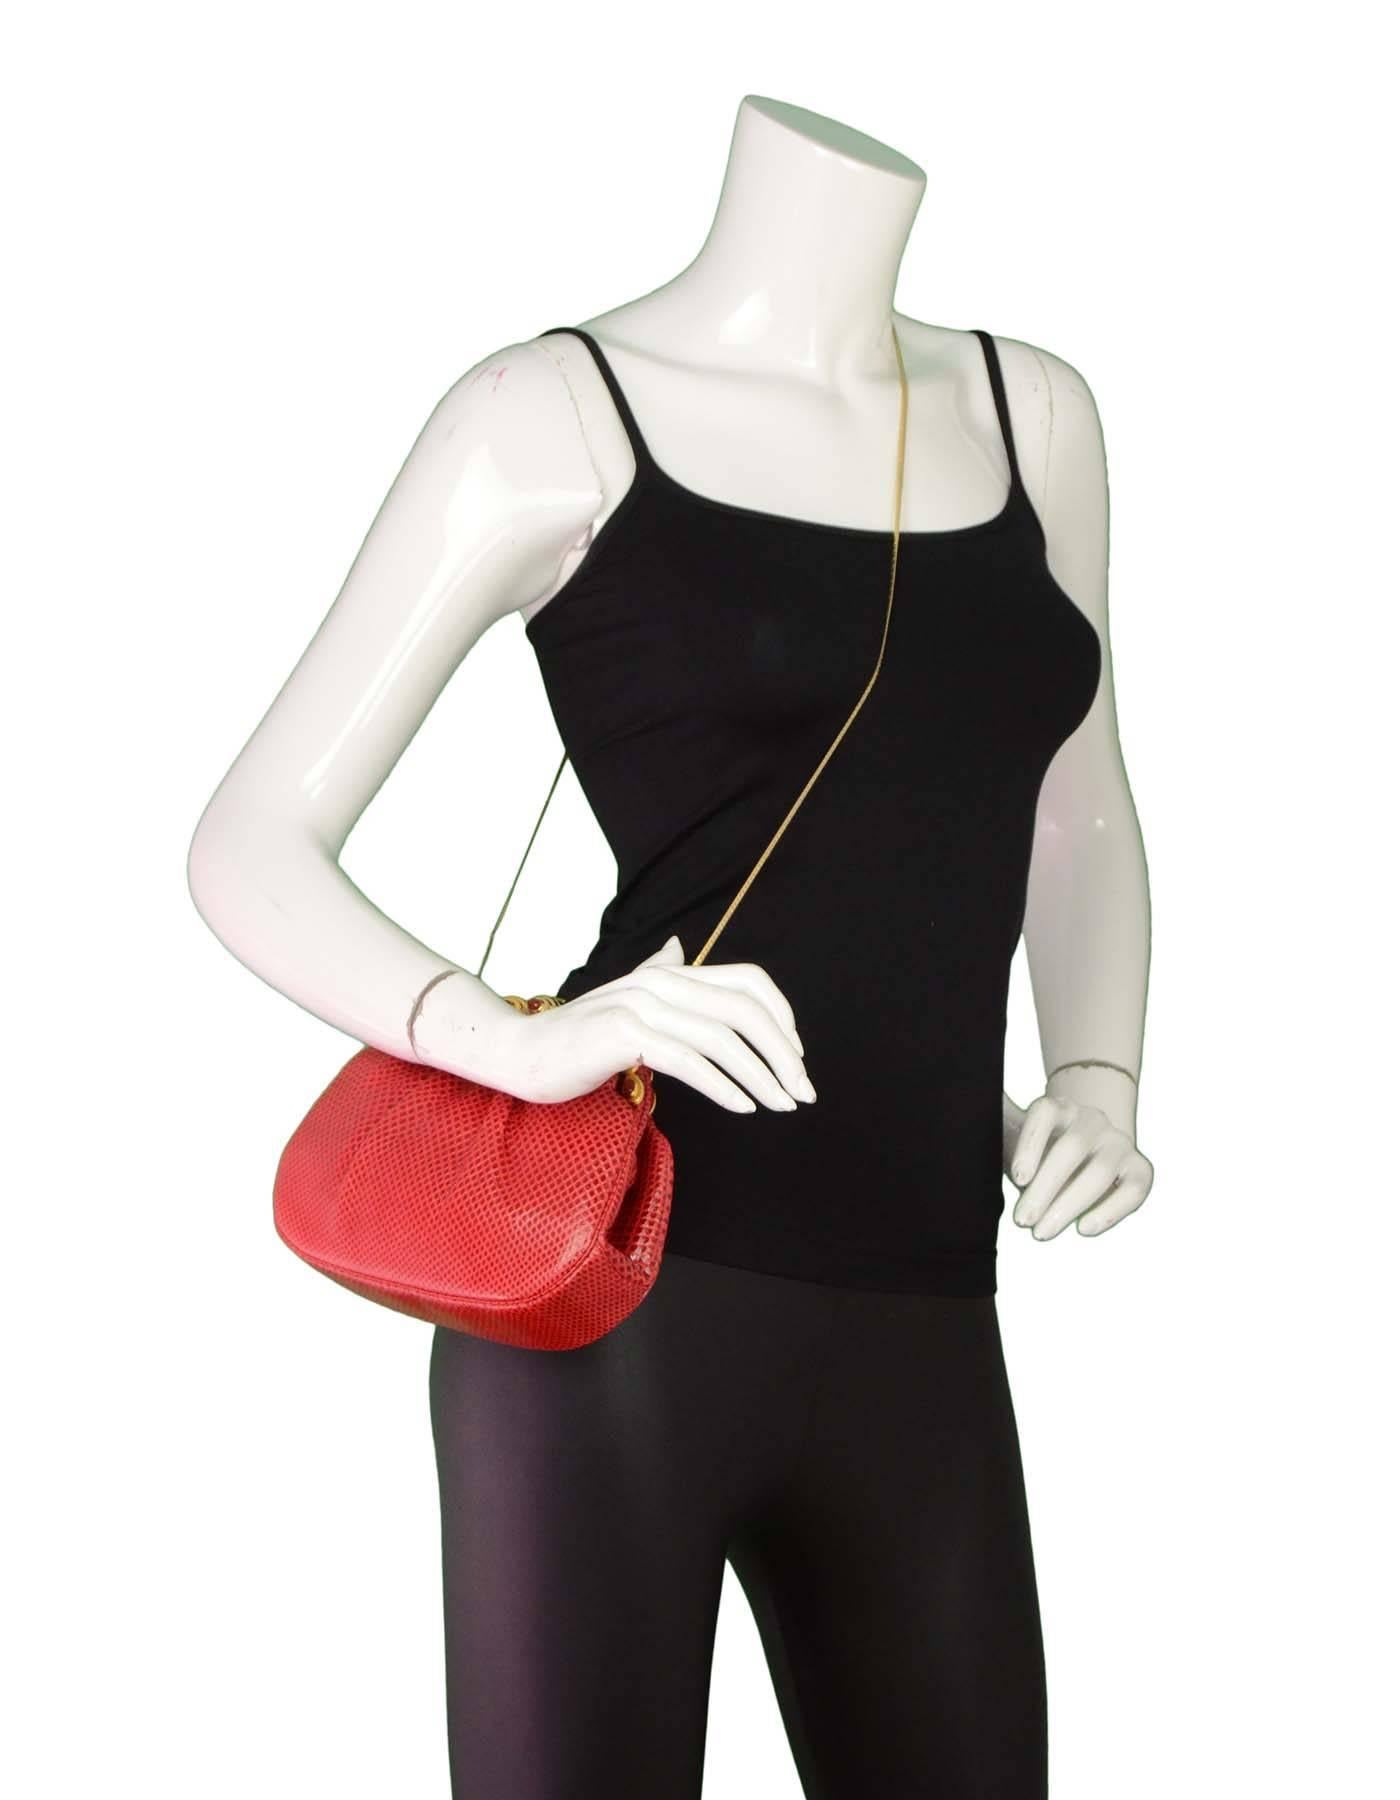 Judith Leiber Red Karung Clutch with GHW

Features optional shoulder strap that can be tucked into bag

Color: Red
Hardware: Goldtone
Materials: Karung snakeskin and metal
Lining: Red textile
Closure/Opening: Frame top with jeweled snap lock